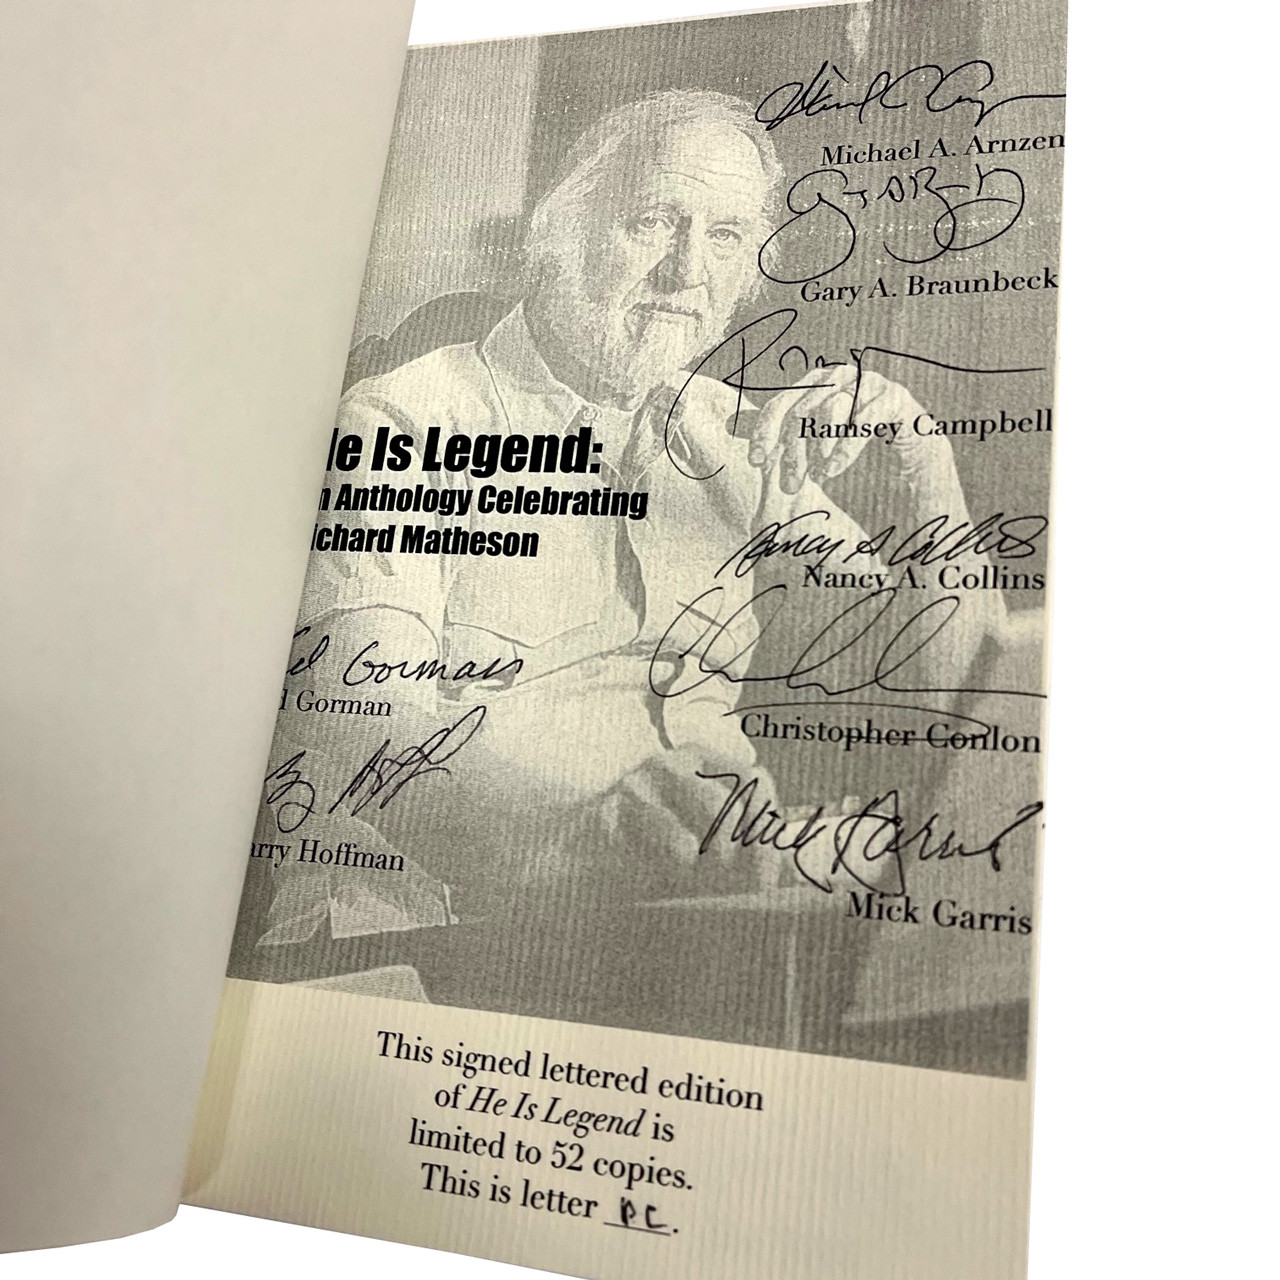 "He Is Legend: An Anthology Celebrating Richard Matheson" Signed Lettered Edition "PC", Signed by Stephen King, Joe Hill, and others [Very Fine]